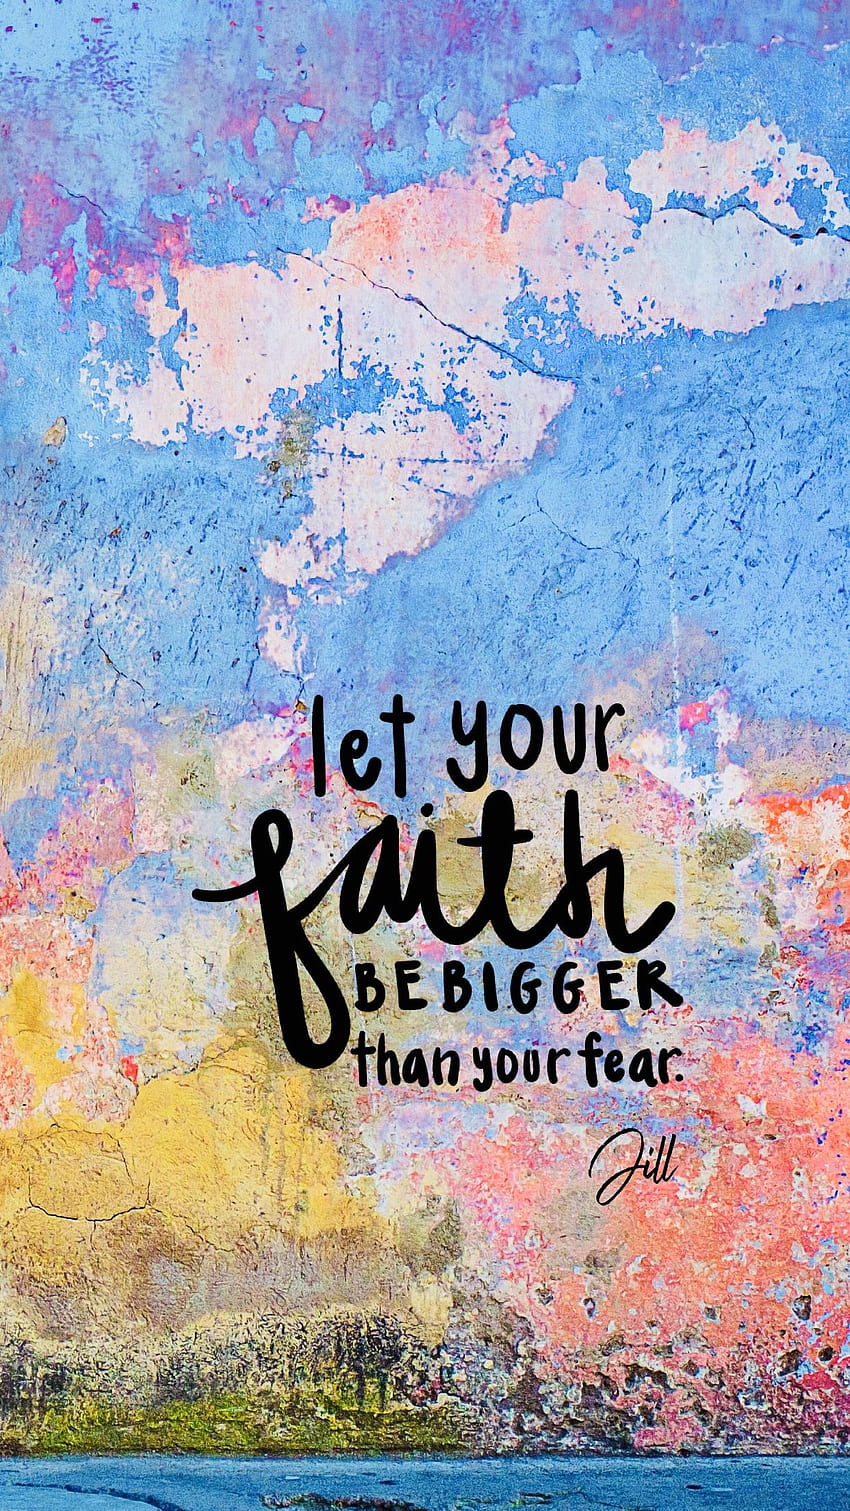 How to Create Bible Verse Phone Wallpaper - Kingdom Bloggers